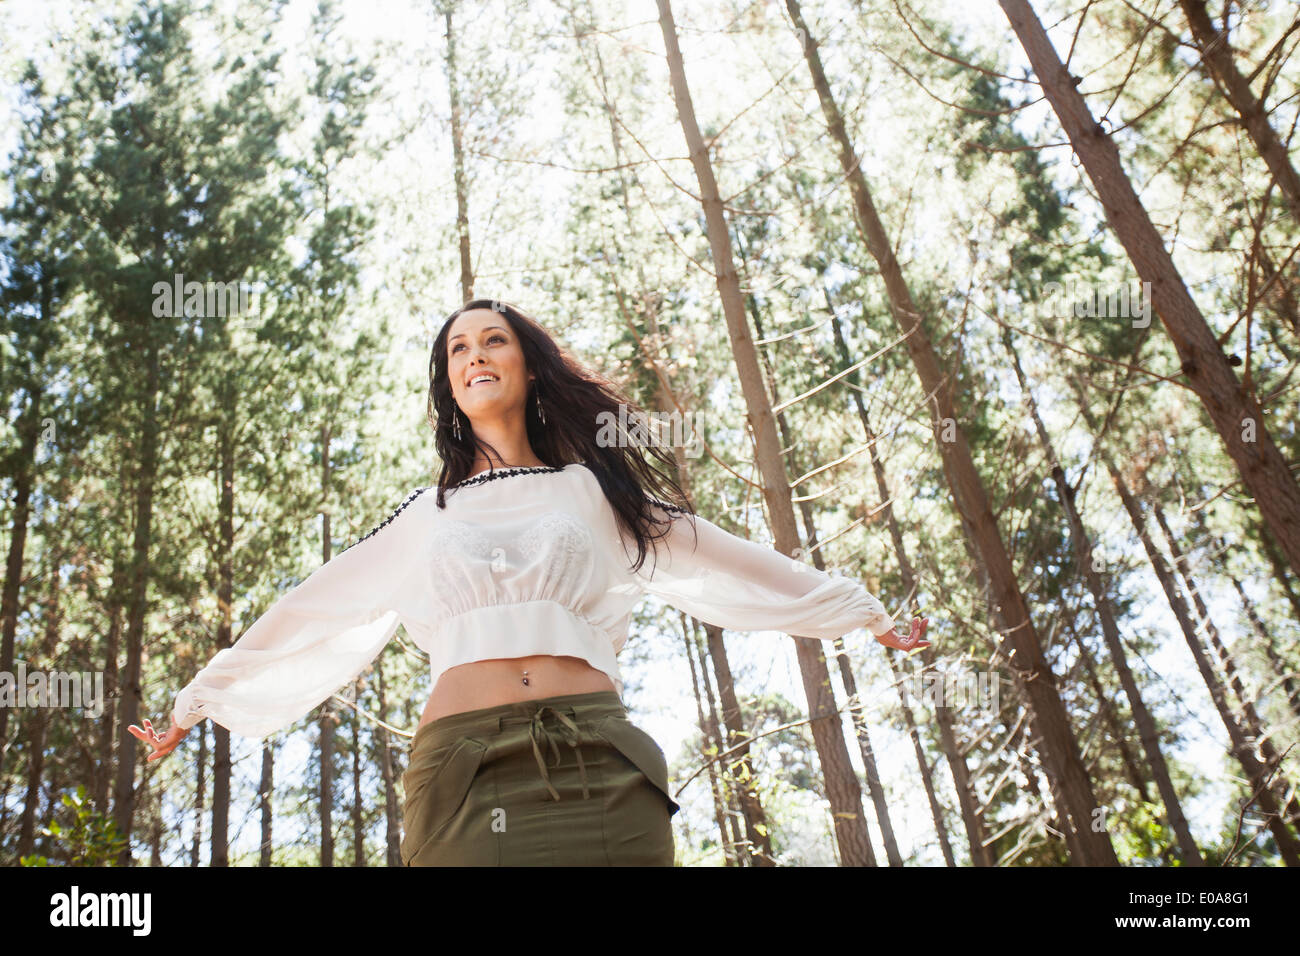 Young woman in forest, arms outstretched Stock Photo